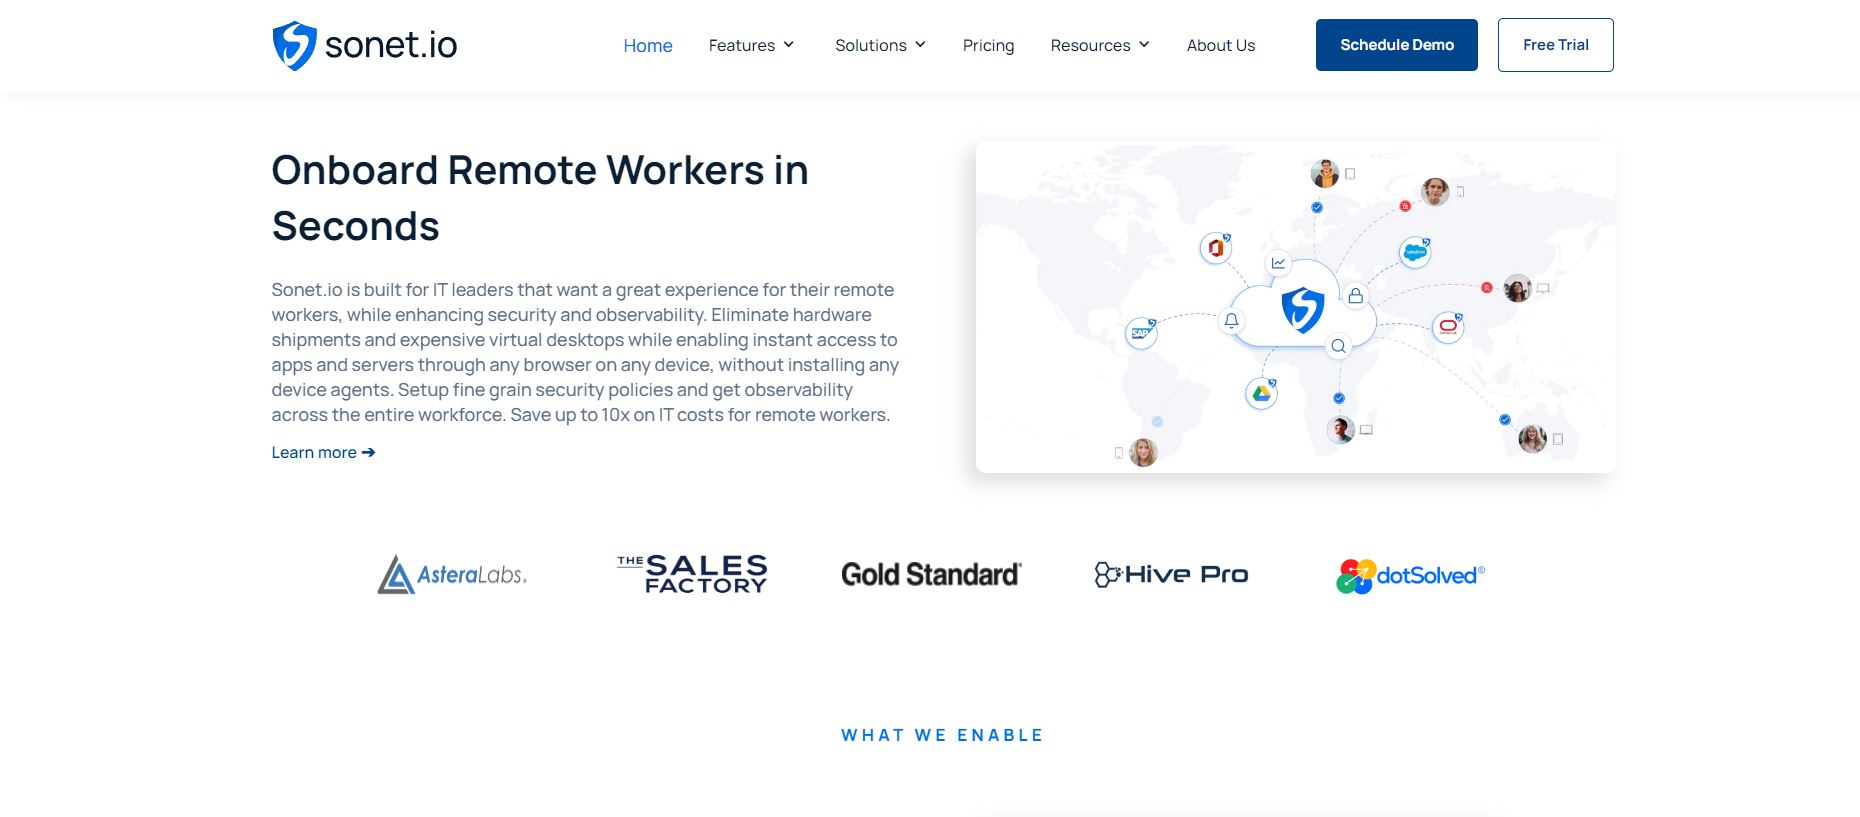 Sonet.io, a San Jose-based startup, that has just raised $6M in seed funding